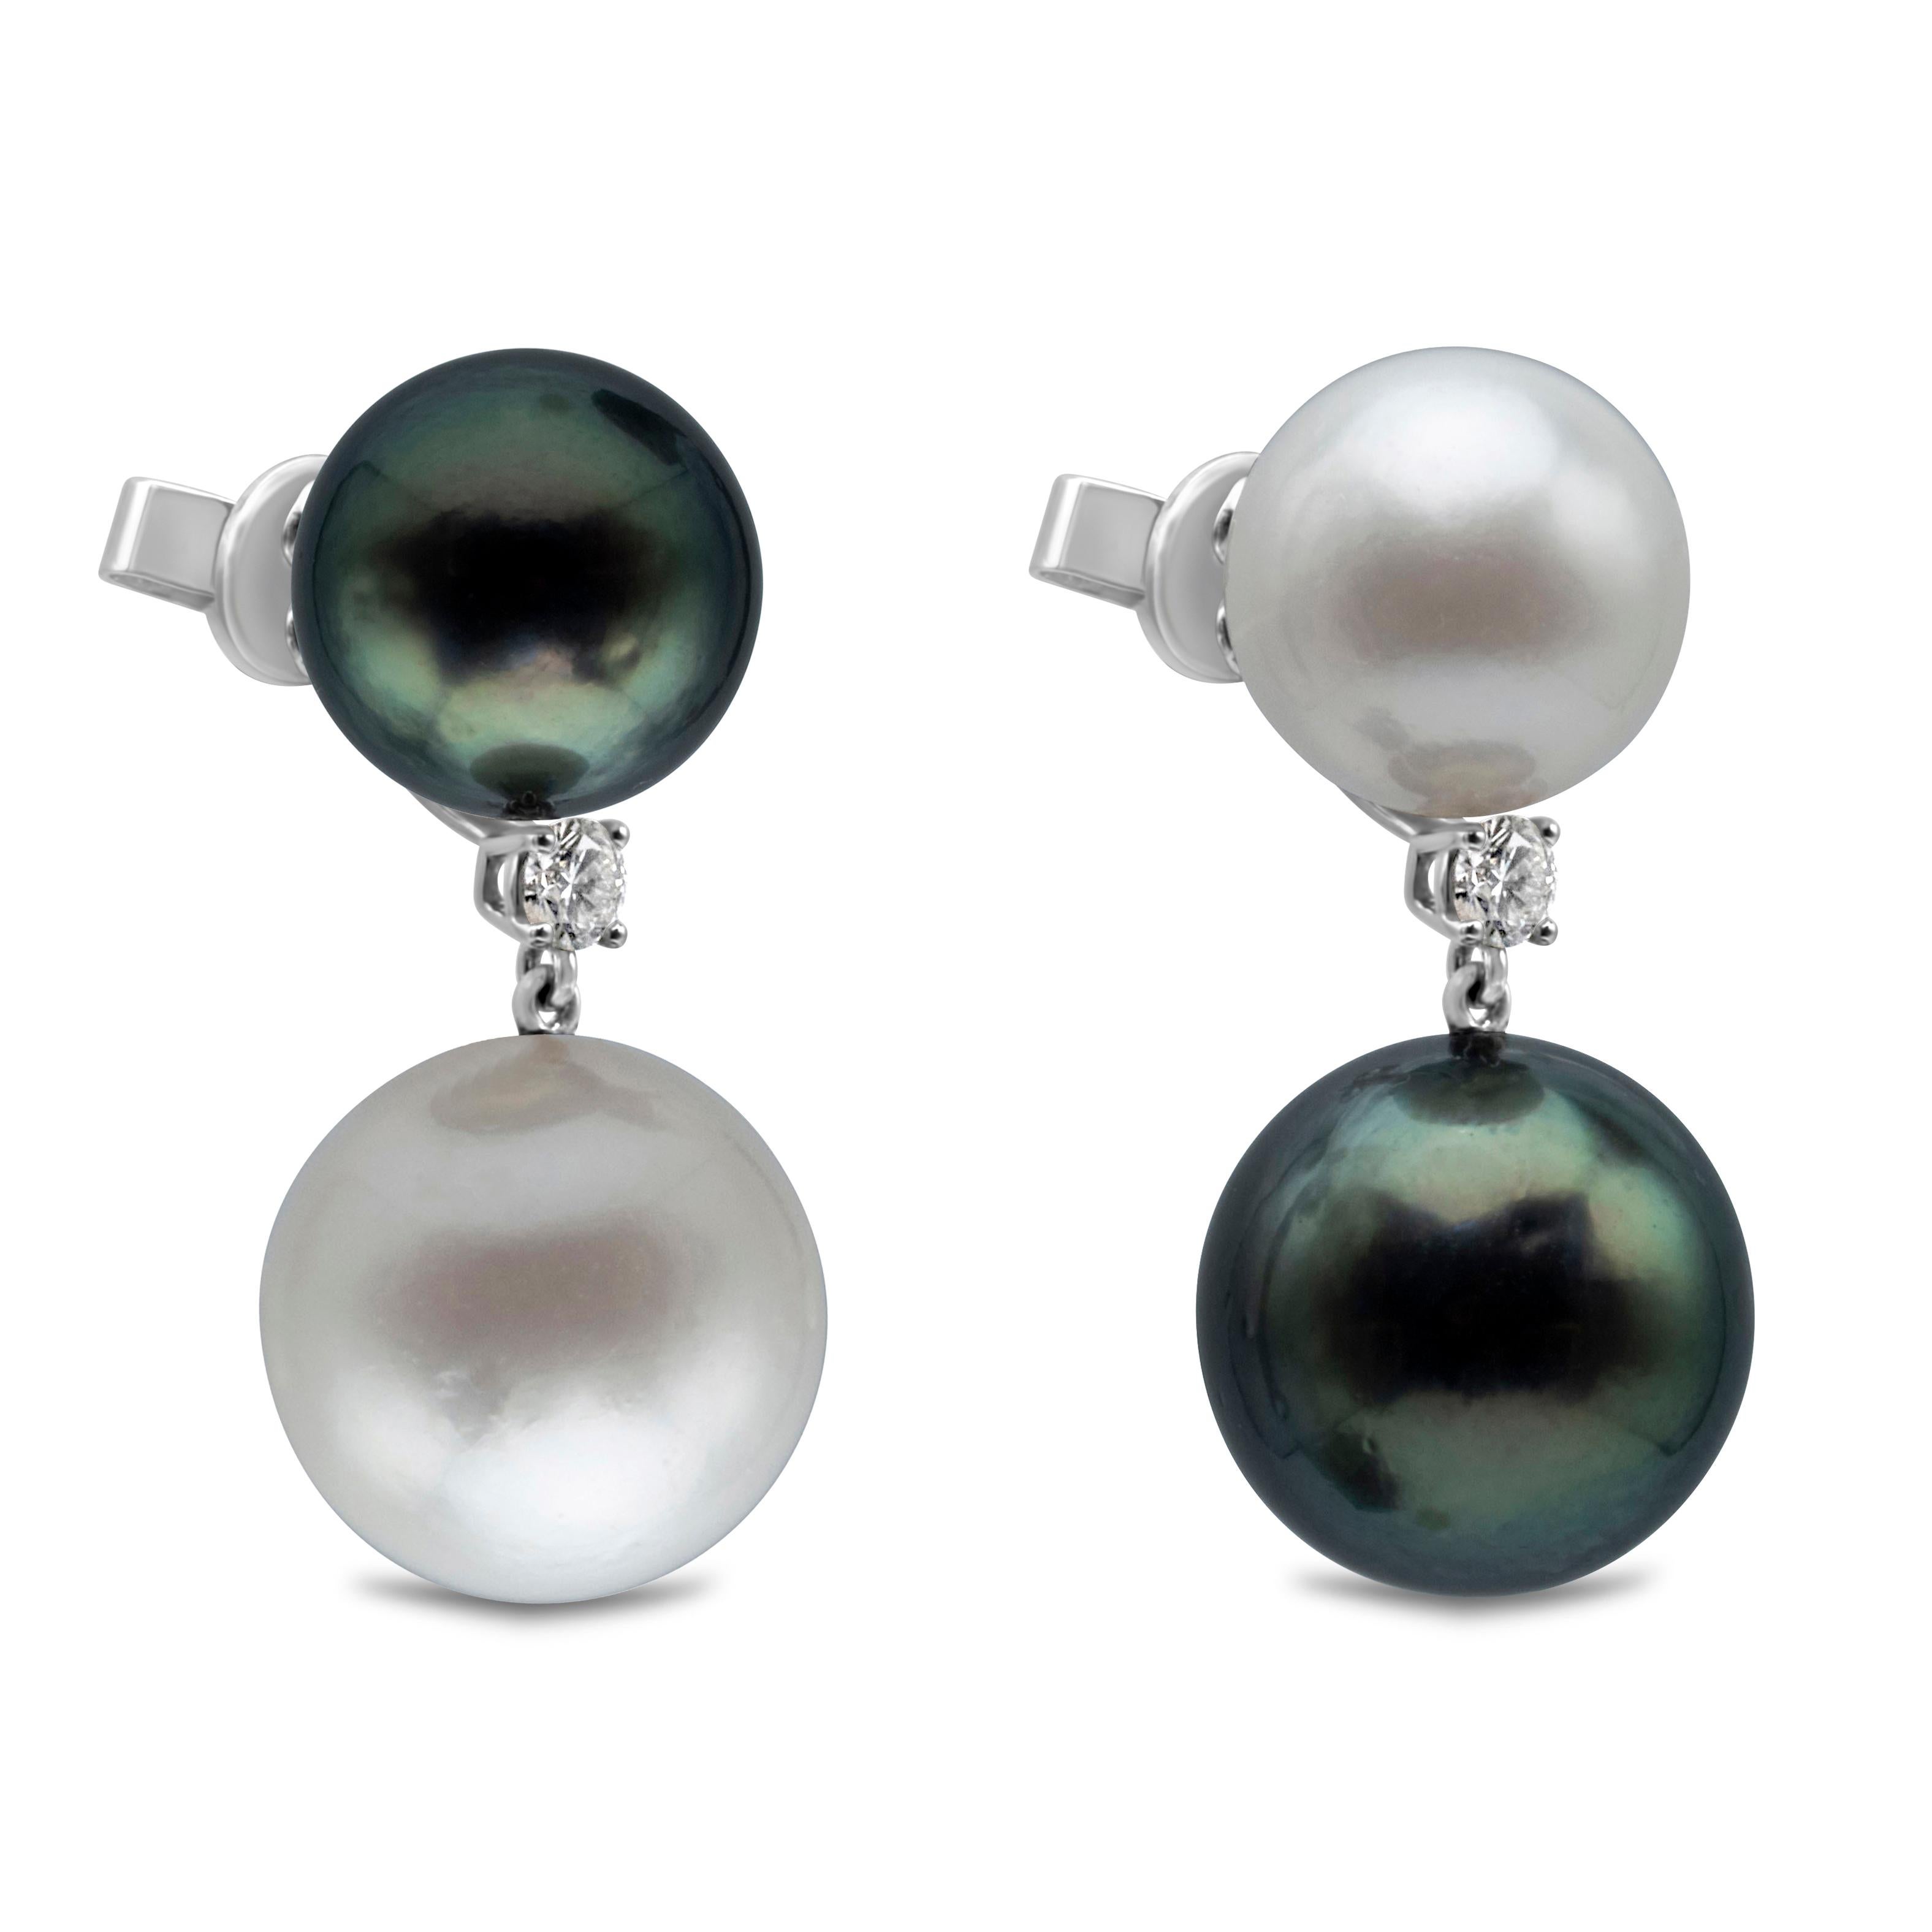 A lustrous dangling pair of pearl earrings showcasing South Sea and Tahitian Pearls, 11-14mm in diameter. Amazingly matched pearls are suspended in a single round diamond weighing 0.25 carats. Made in 18k White Gold. 

Style available with matching